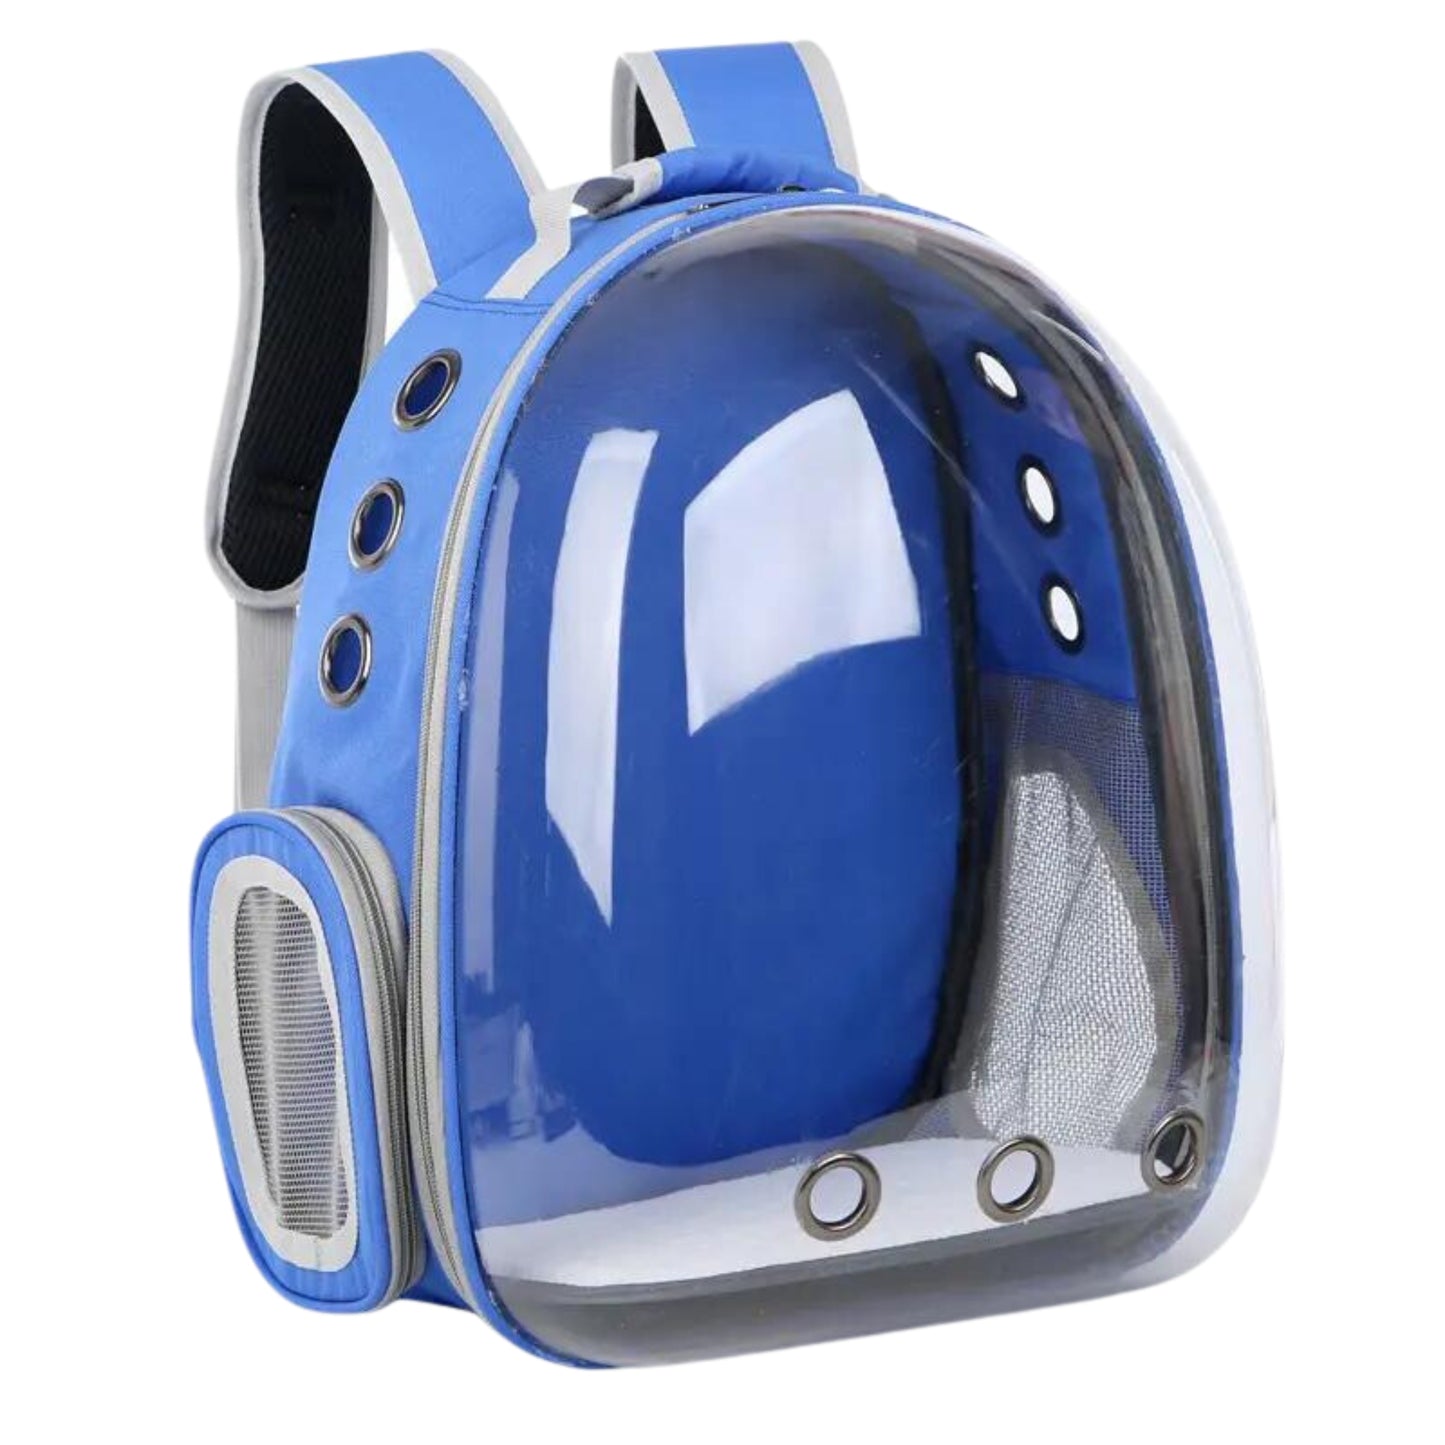 Foodie Puppies Transparent Travel Backpack for Puppies & Cats (Blue)